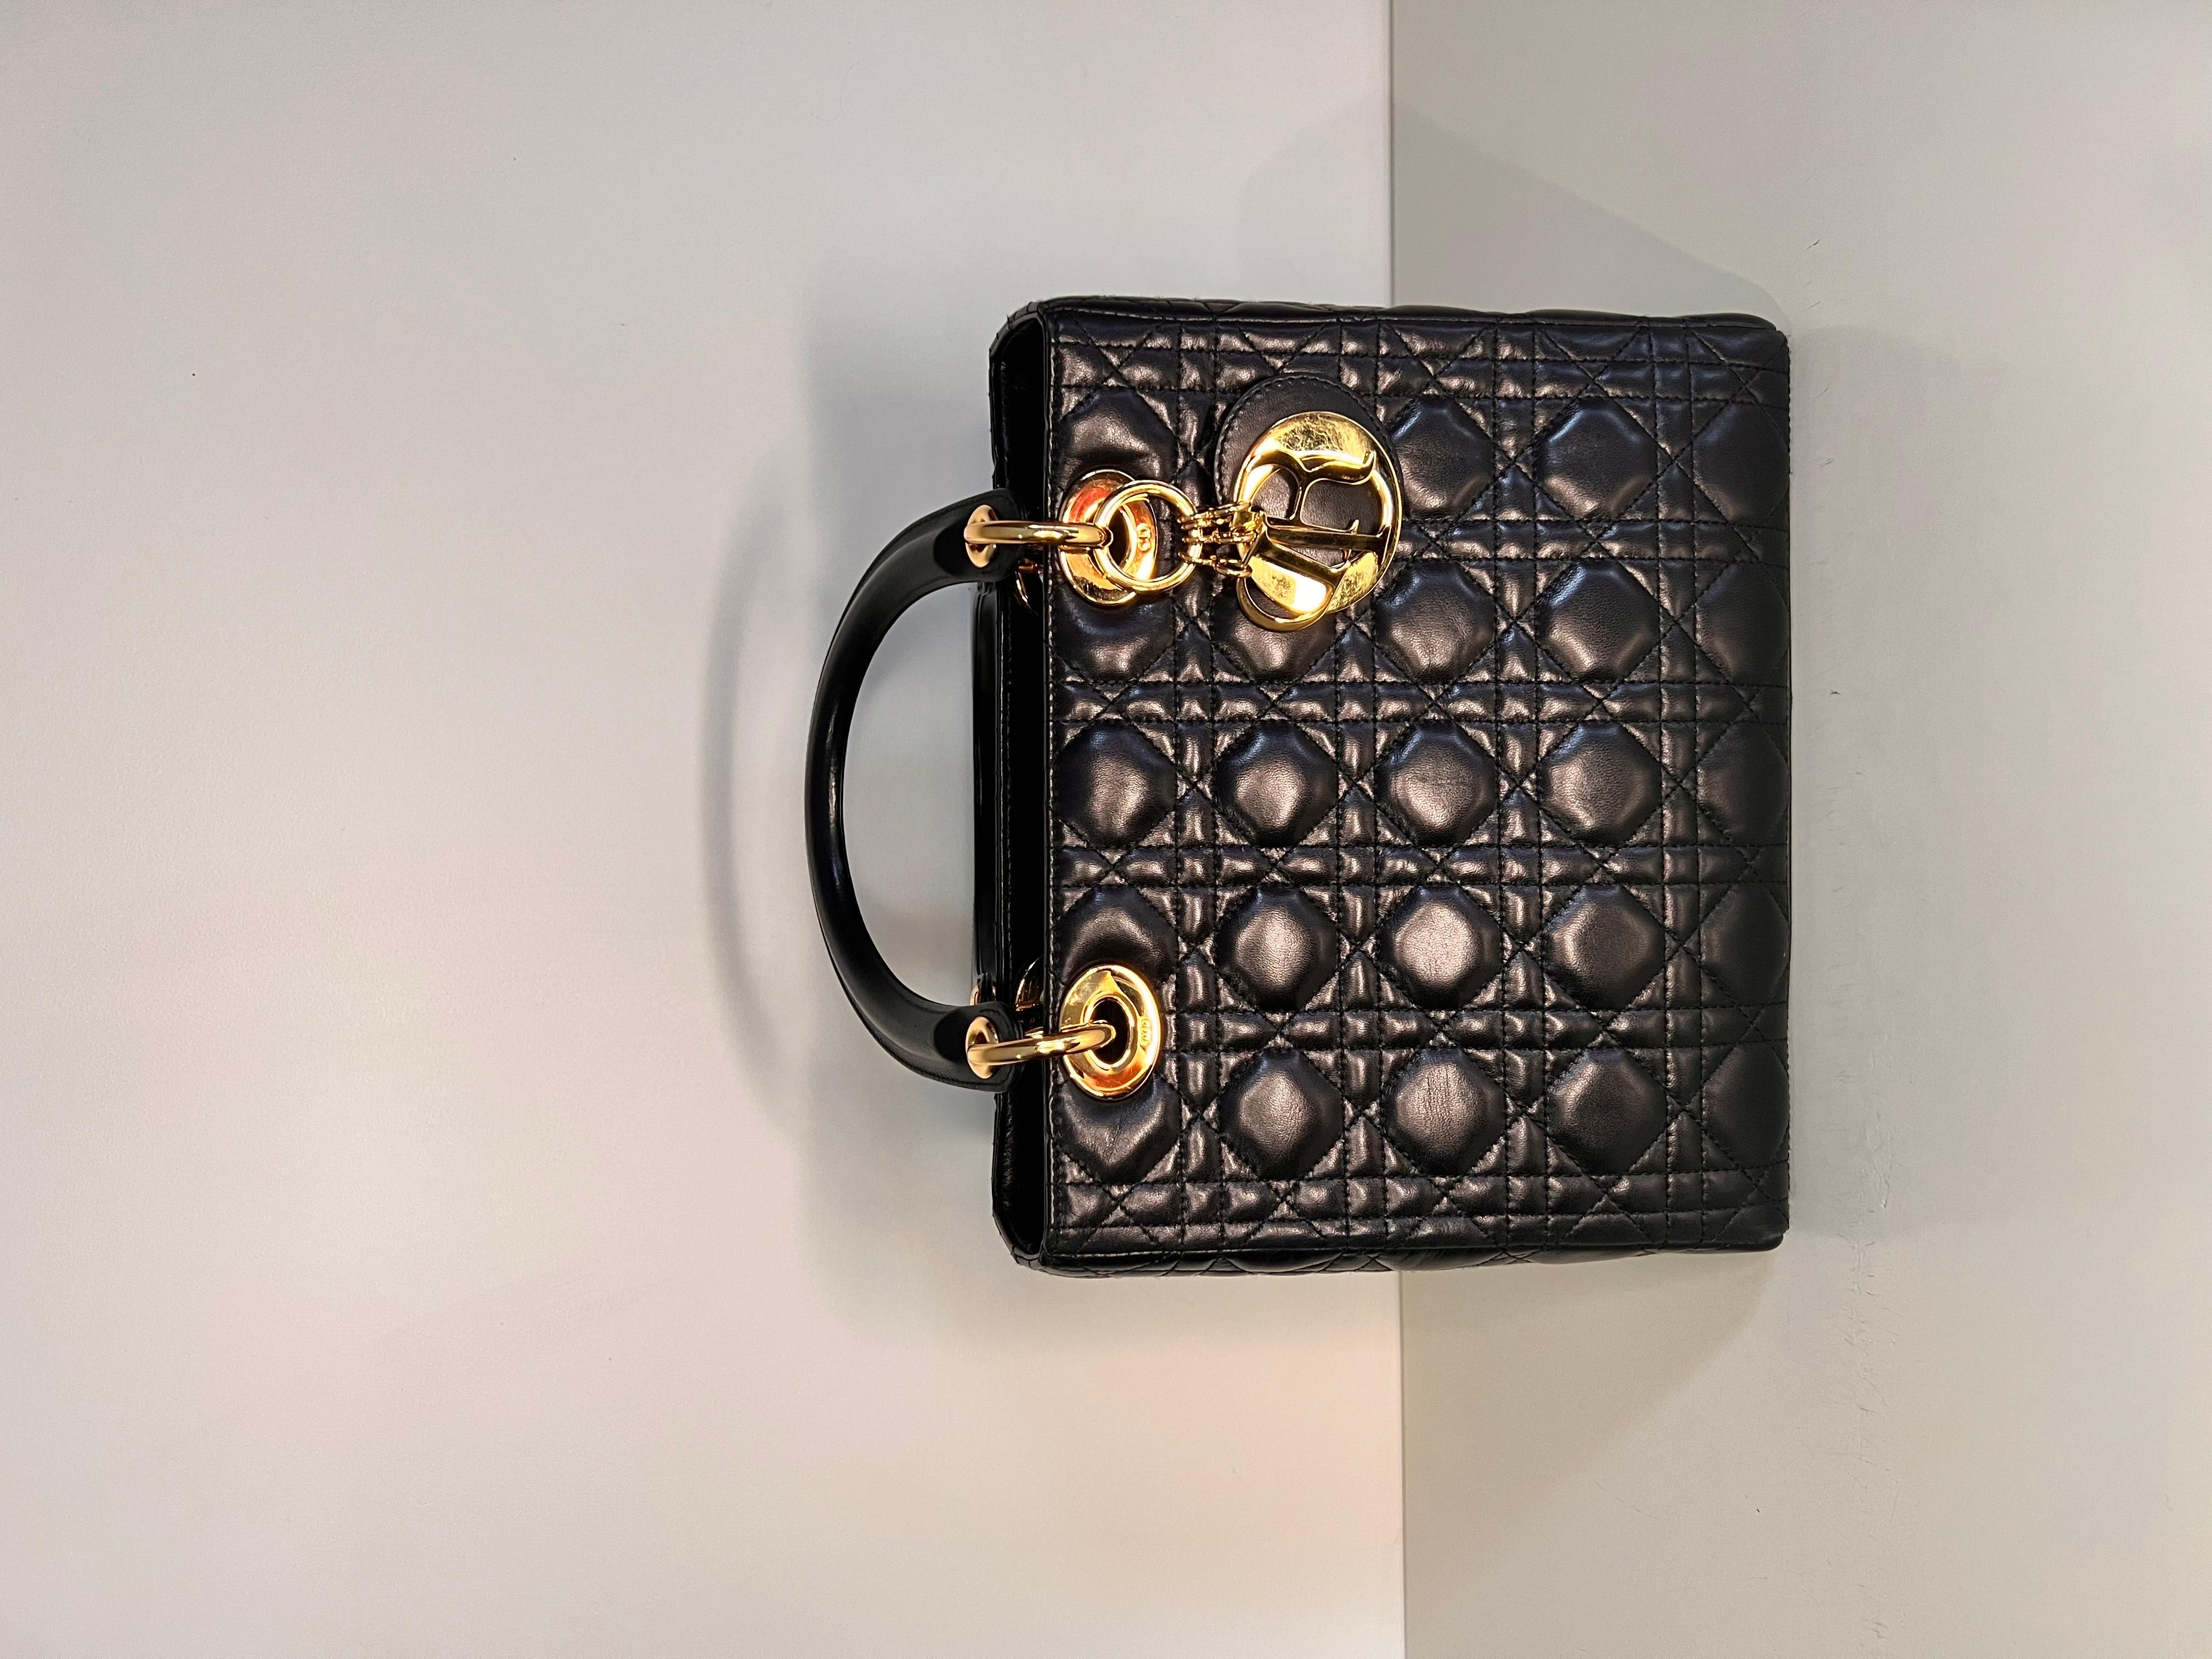 Lady DIOR quilted handbag with gold hardware, famously worn by Princess Diana  7